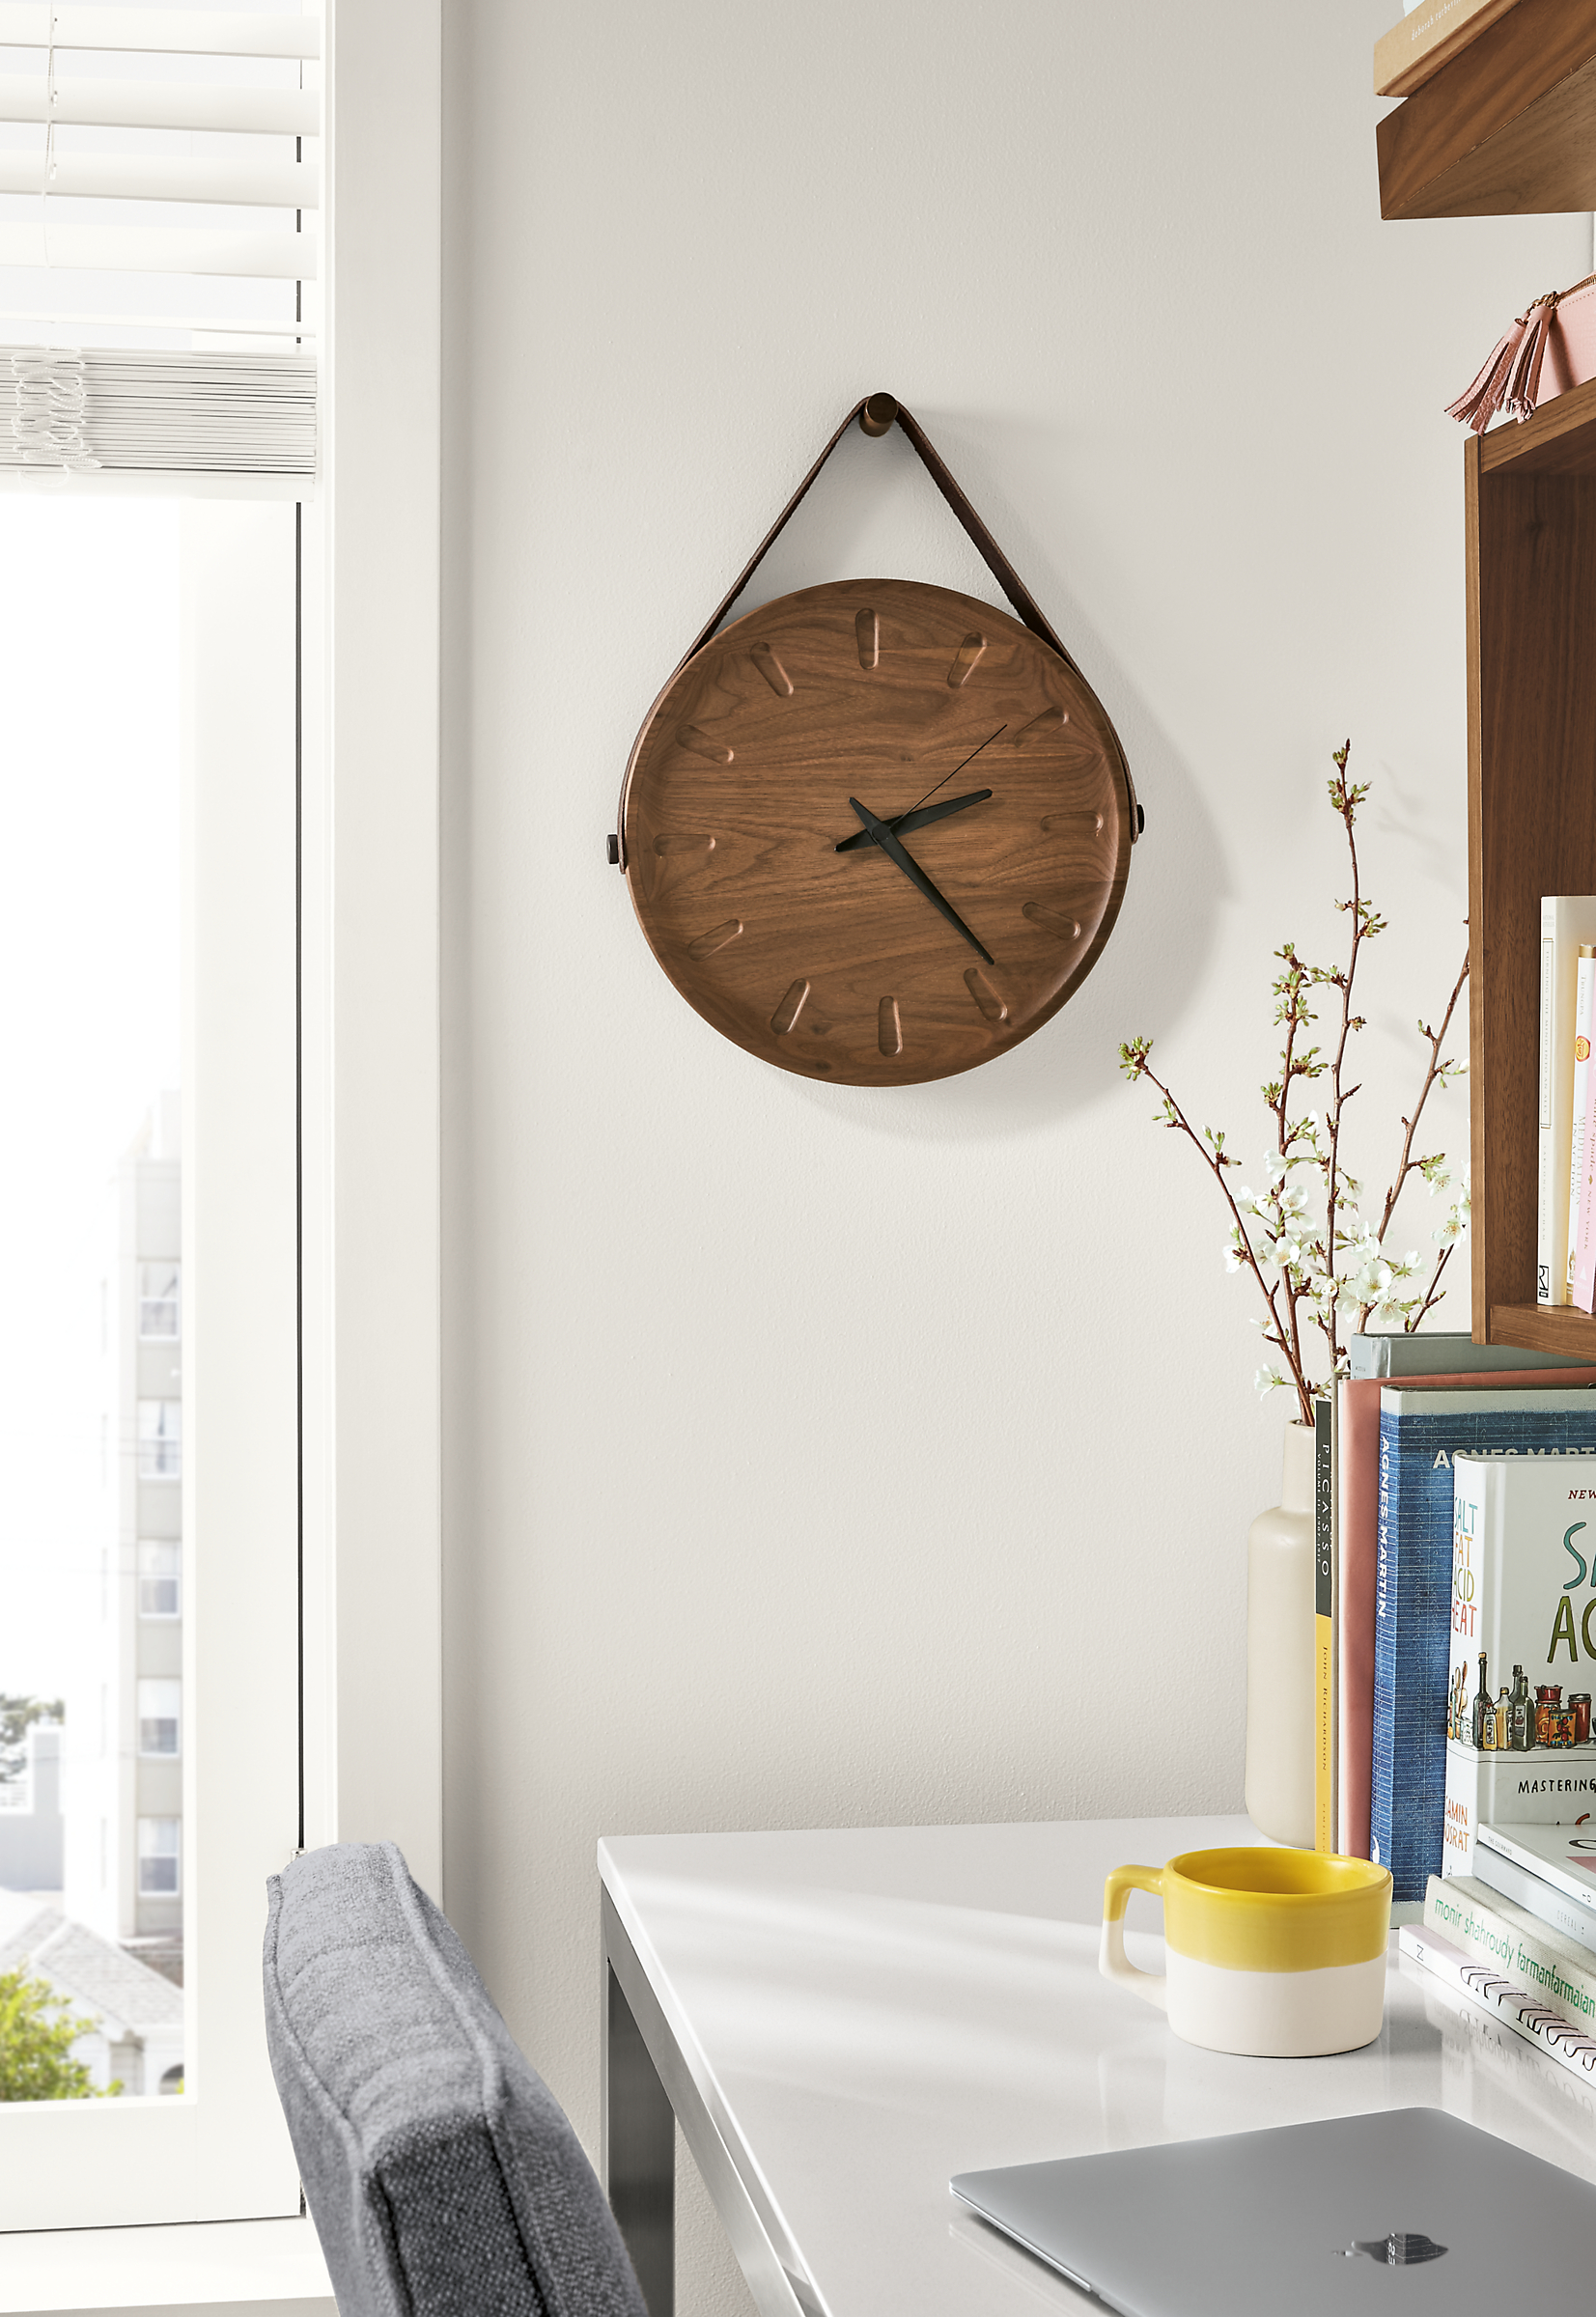 Detail of Toland wall clock in walnut above desk.